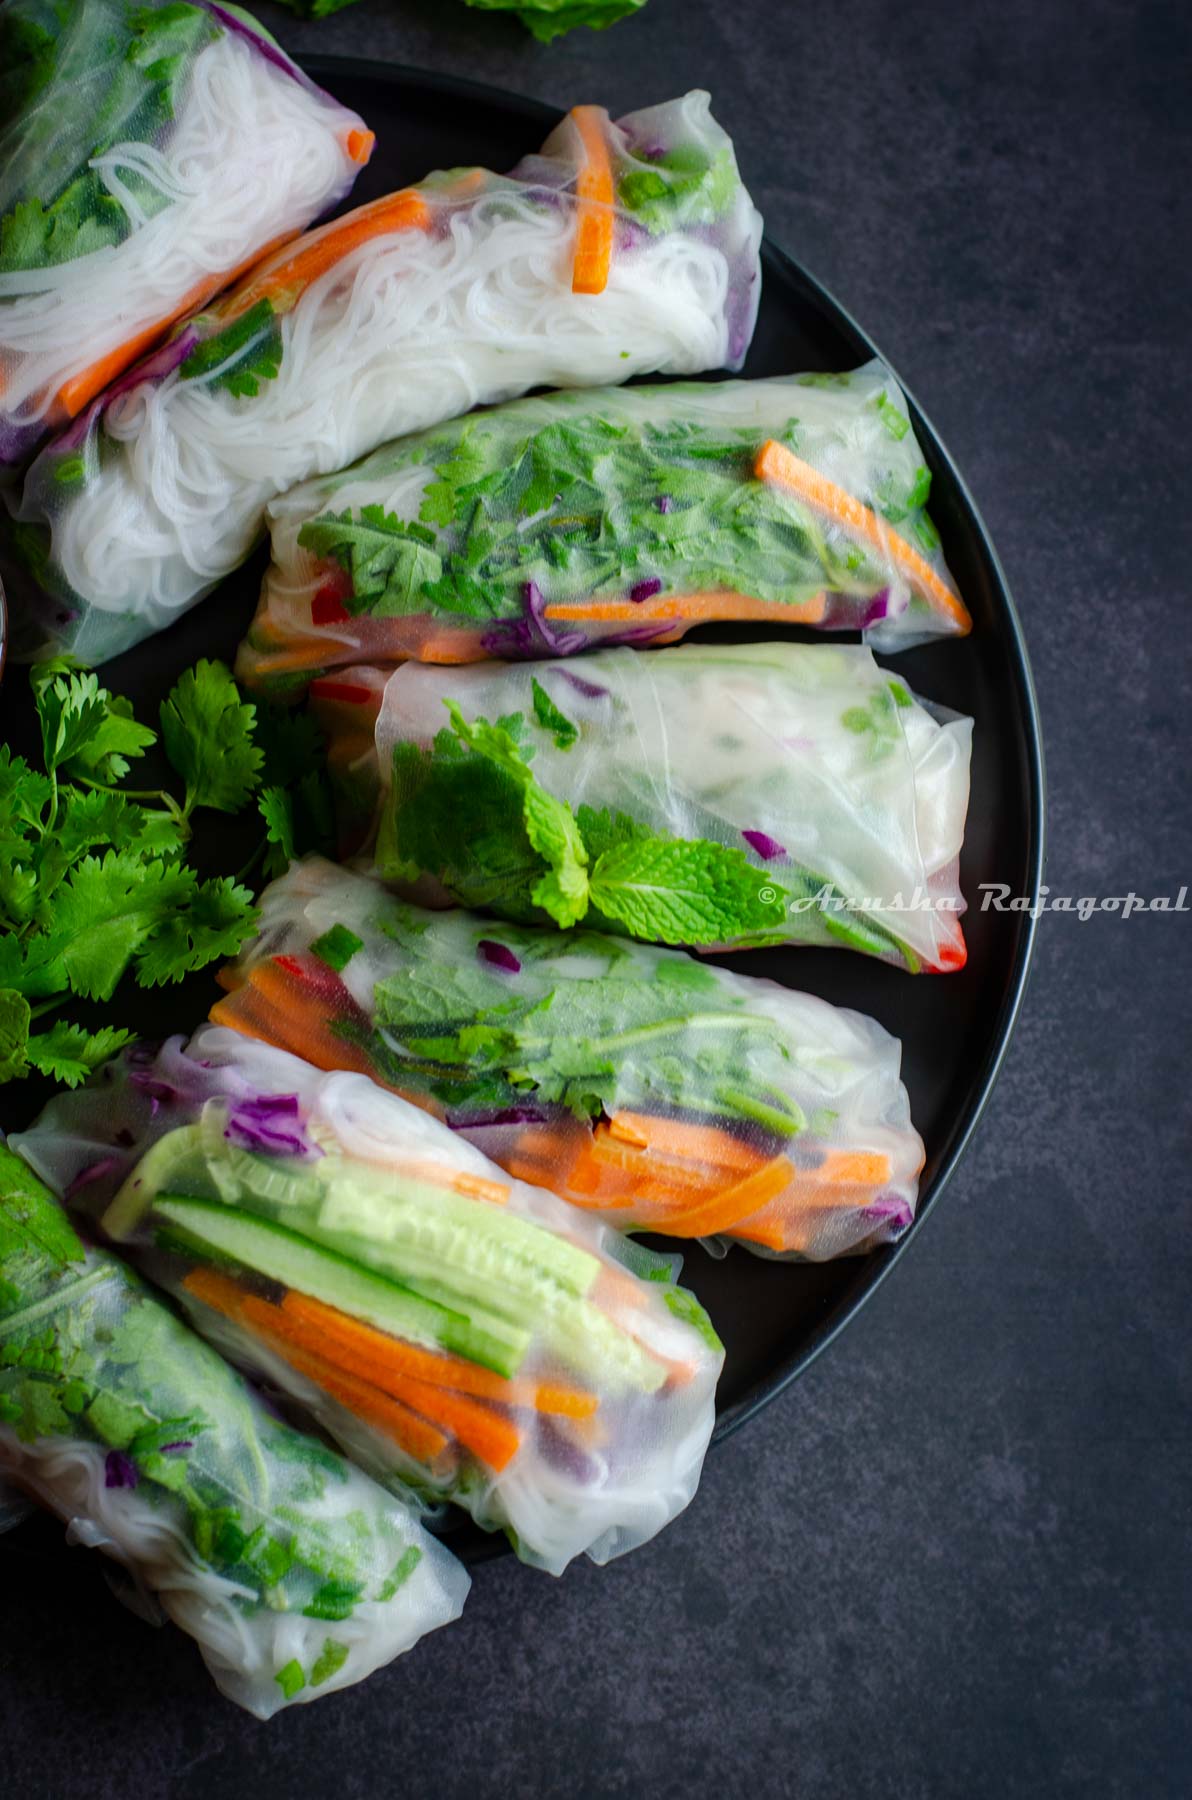 summer rolls wrapped and placed on a black plate over a black background. Fresh cilantro in the middle of the plate but appears blurred.